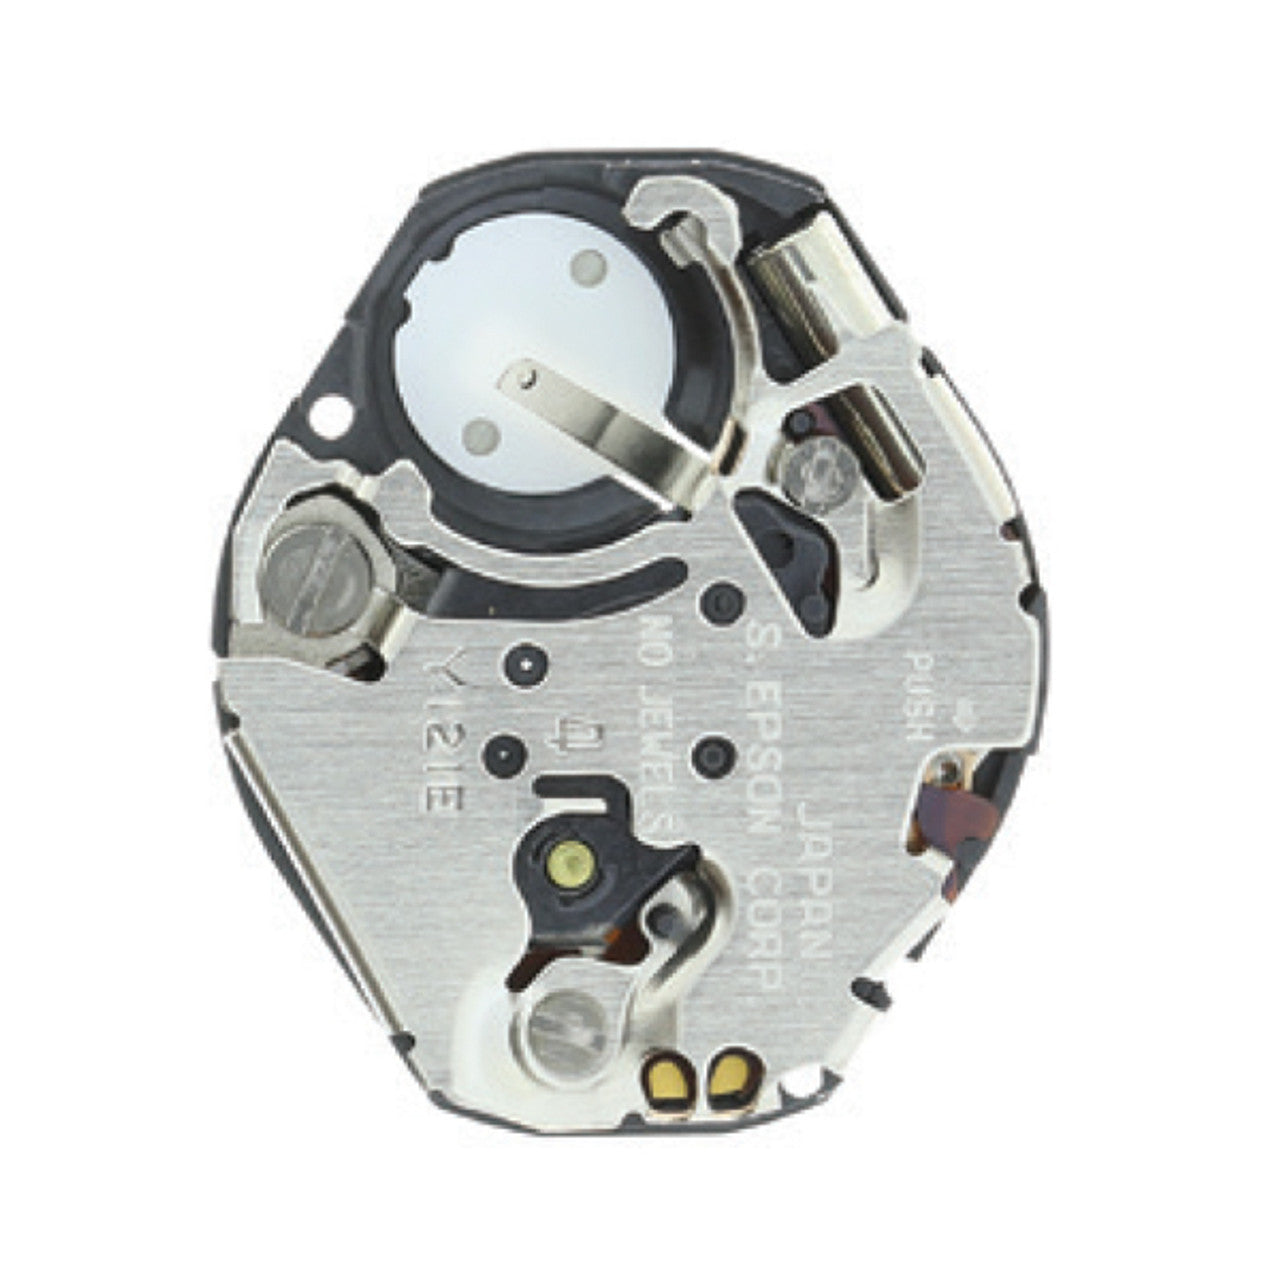 Y121E Height 5 Epson Watch Movement